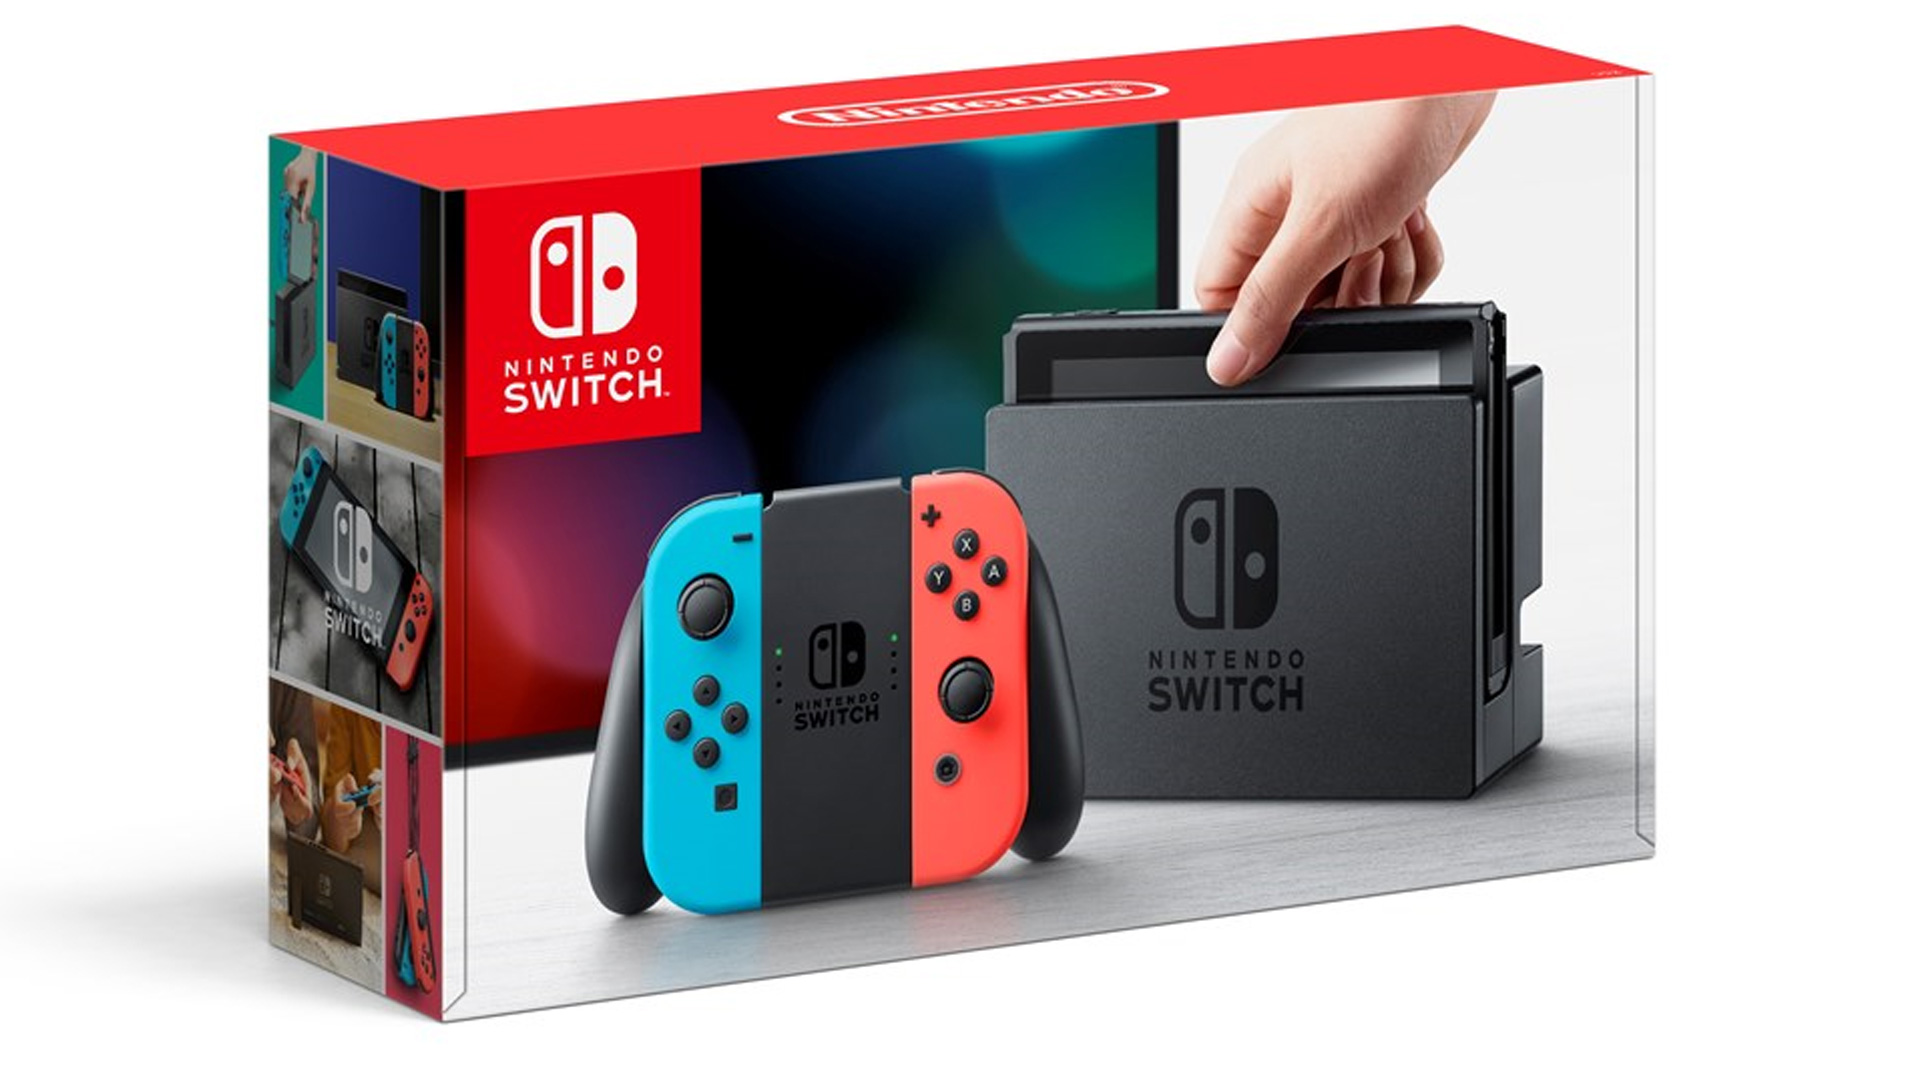 Nintendo Switch Blue and Red console edition